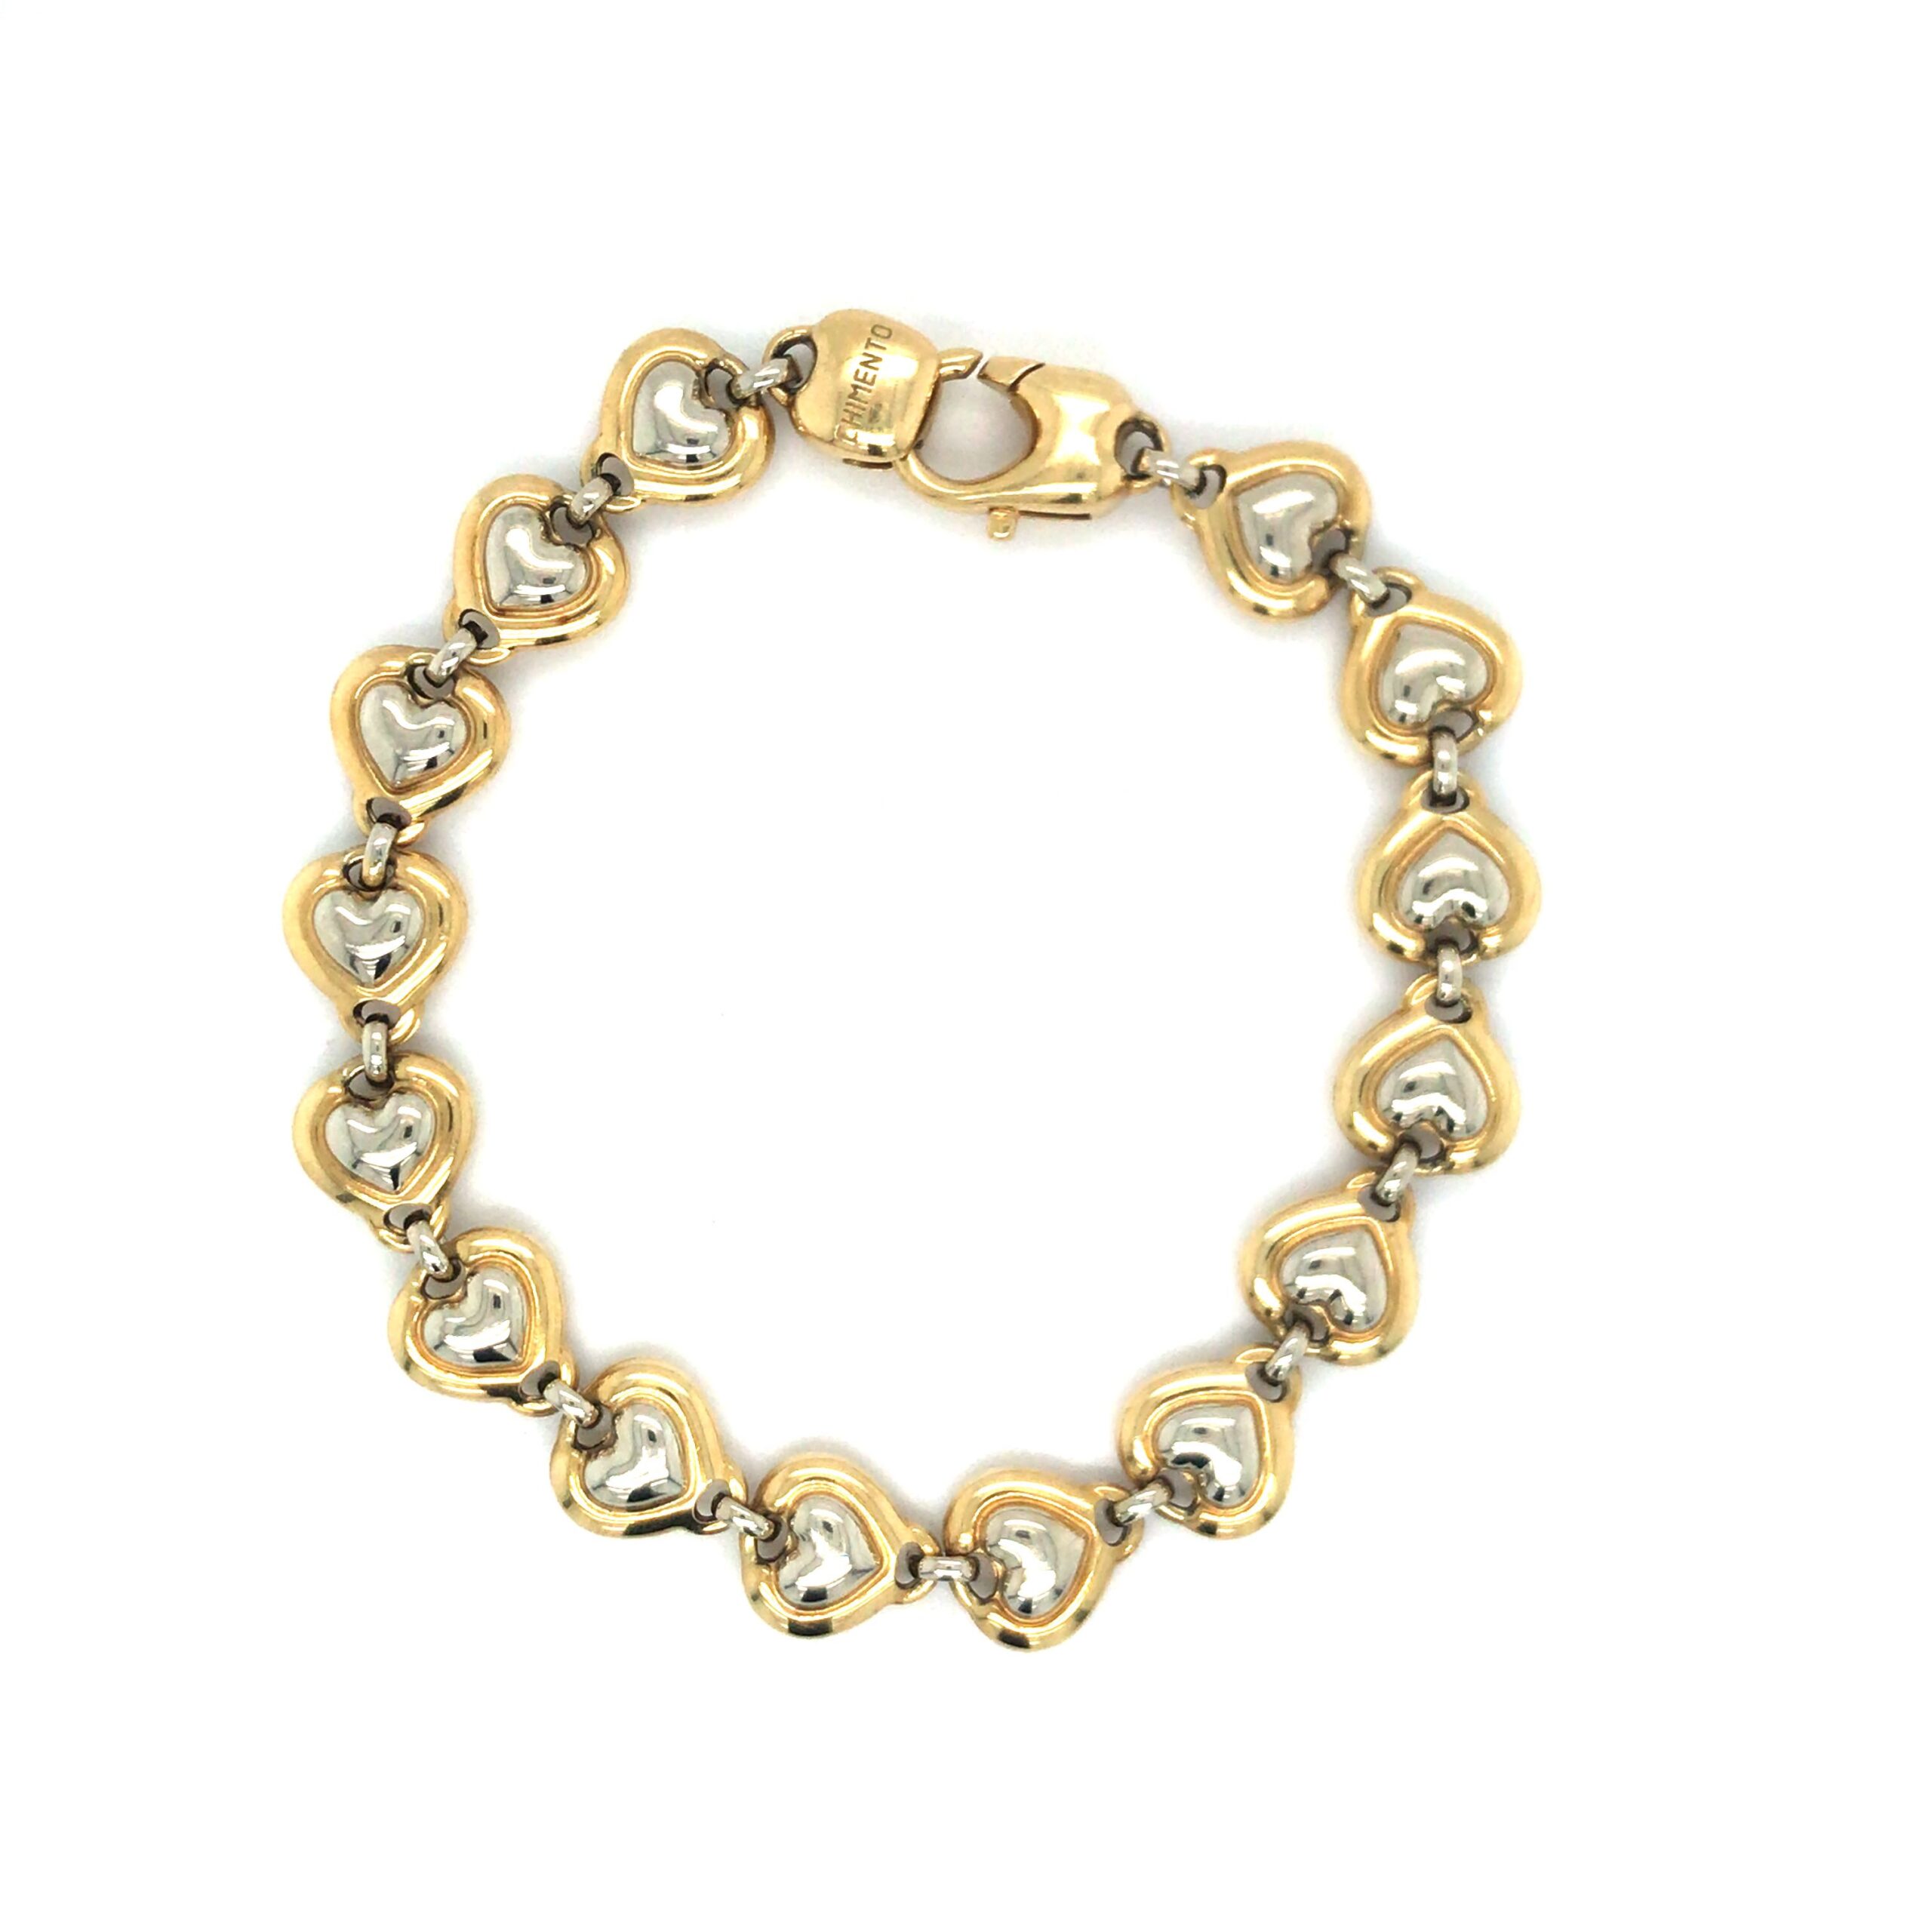 Chimento Reversible Yellow and White Gold Wide Reversible Bracelet